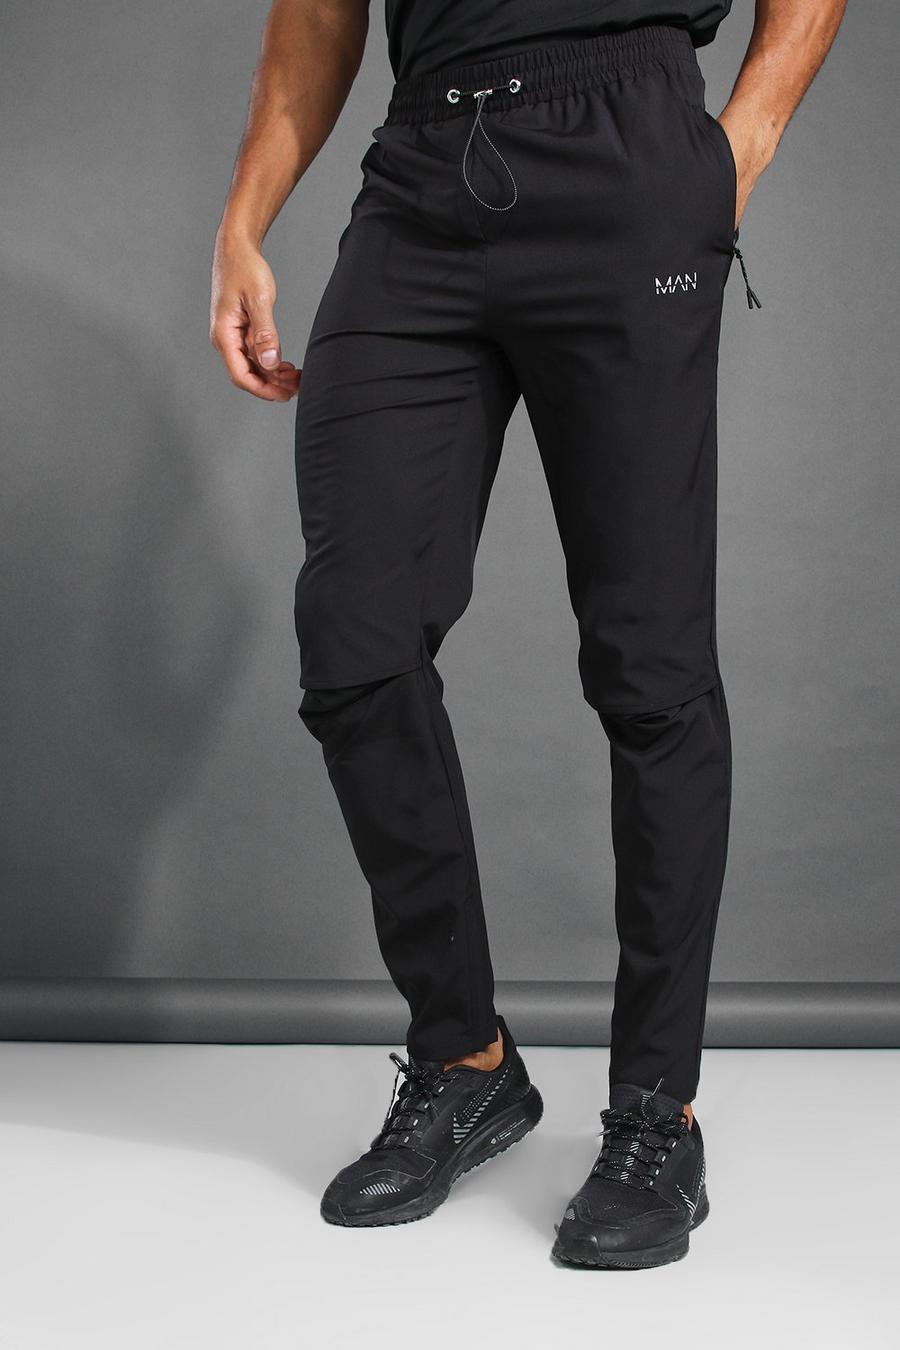 Man Active Gym Tapered Fit Jogger | boohoo